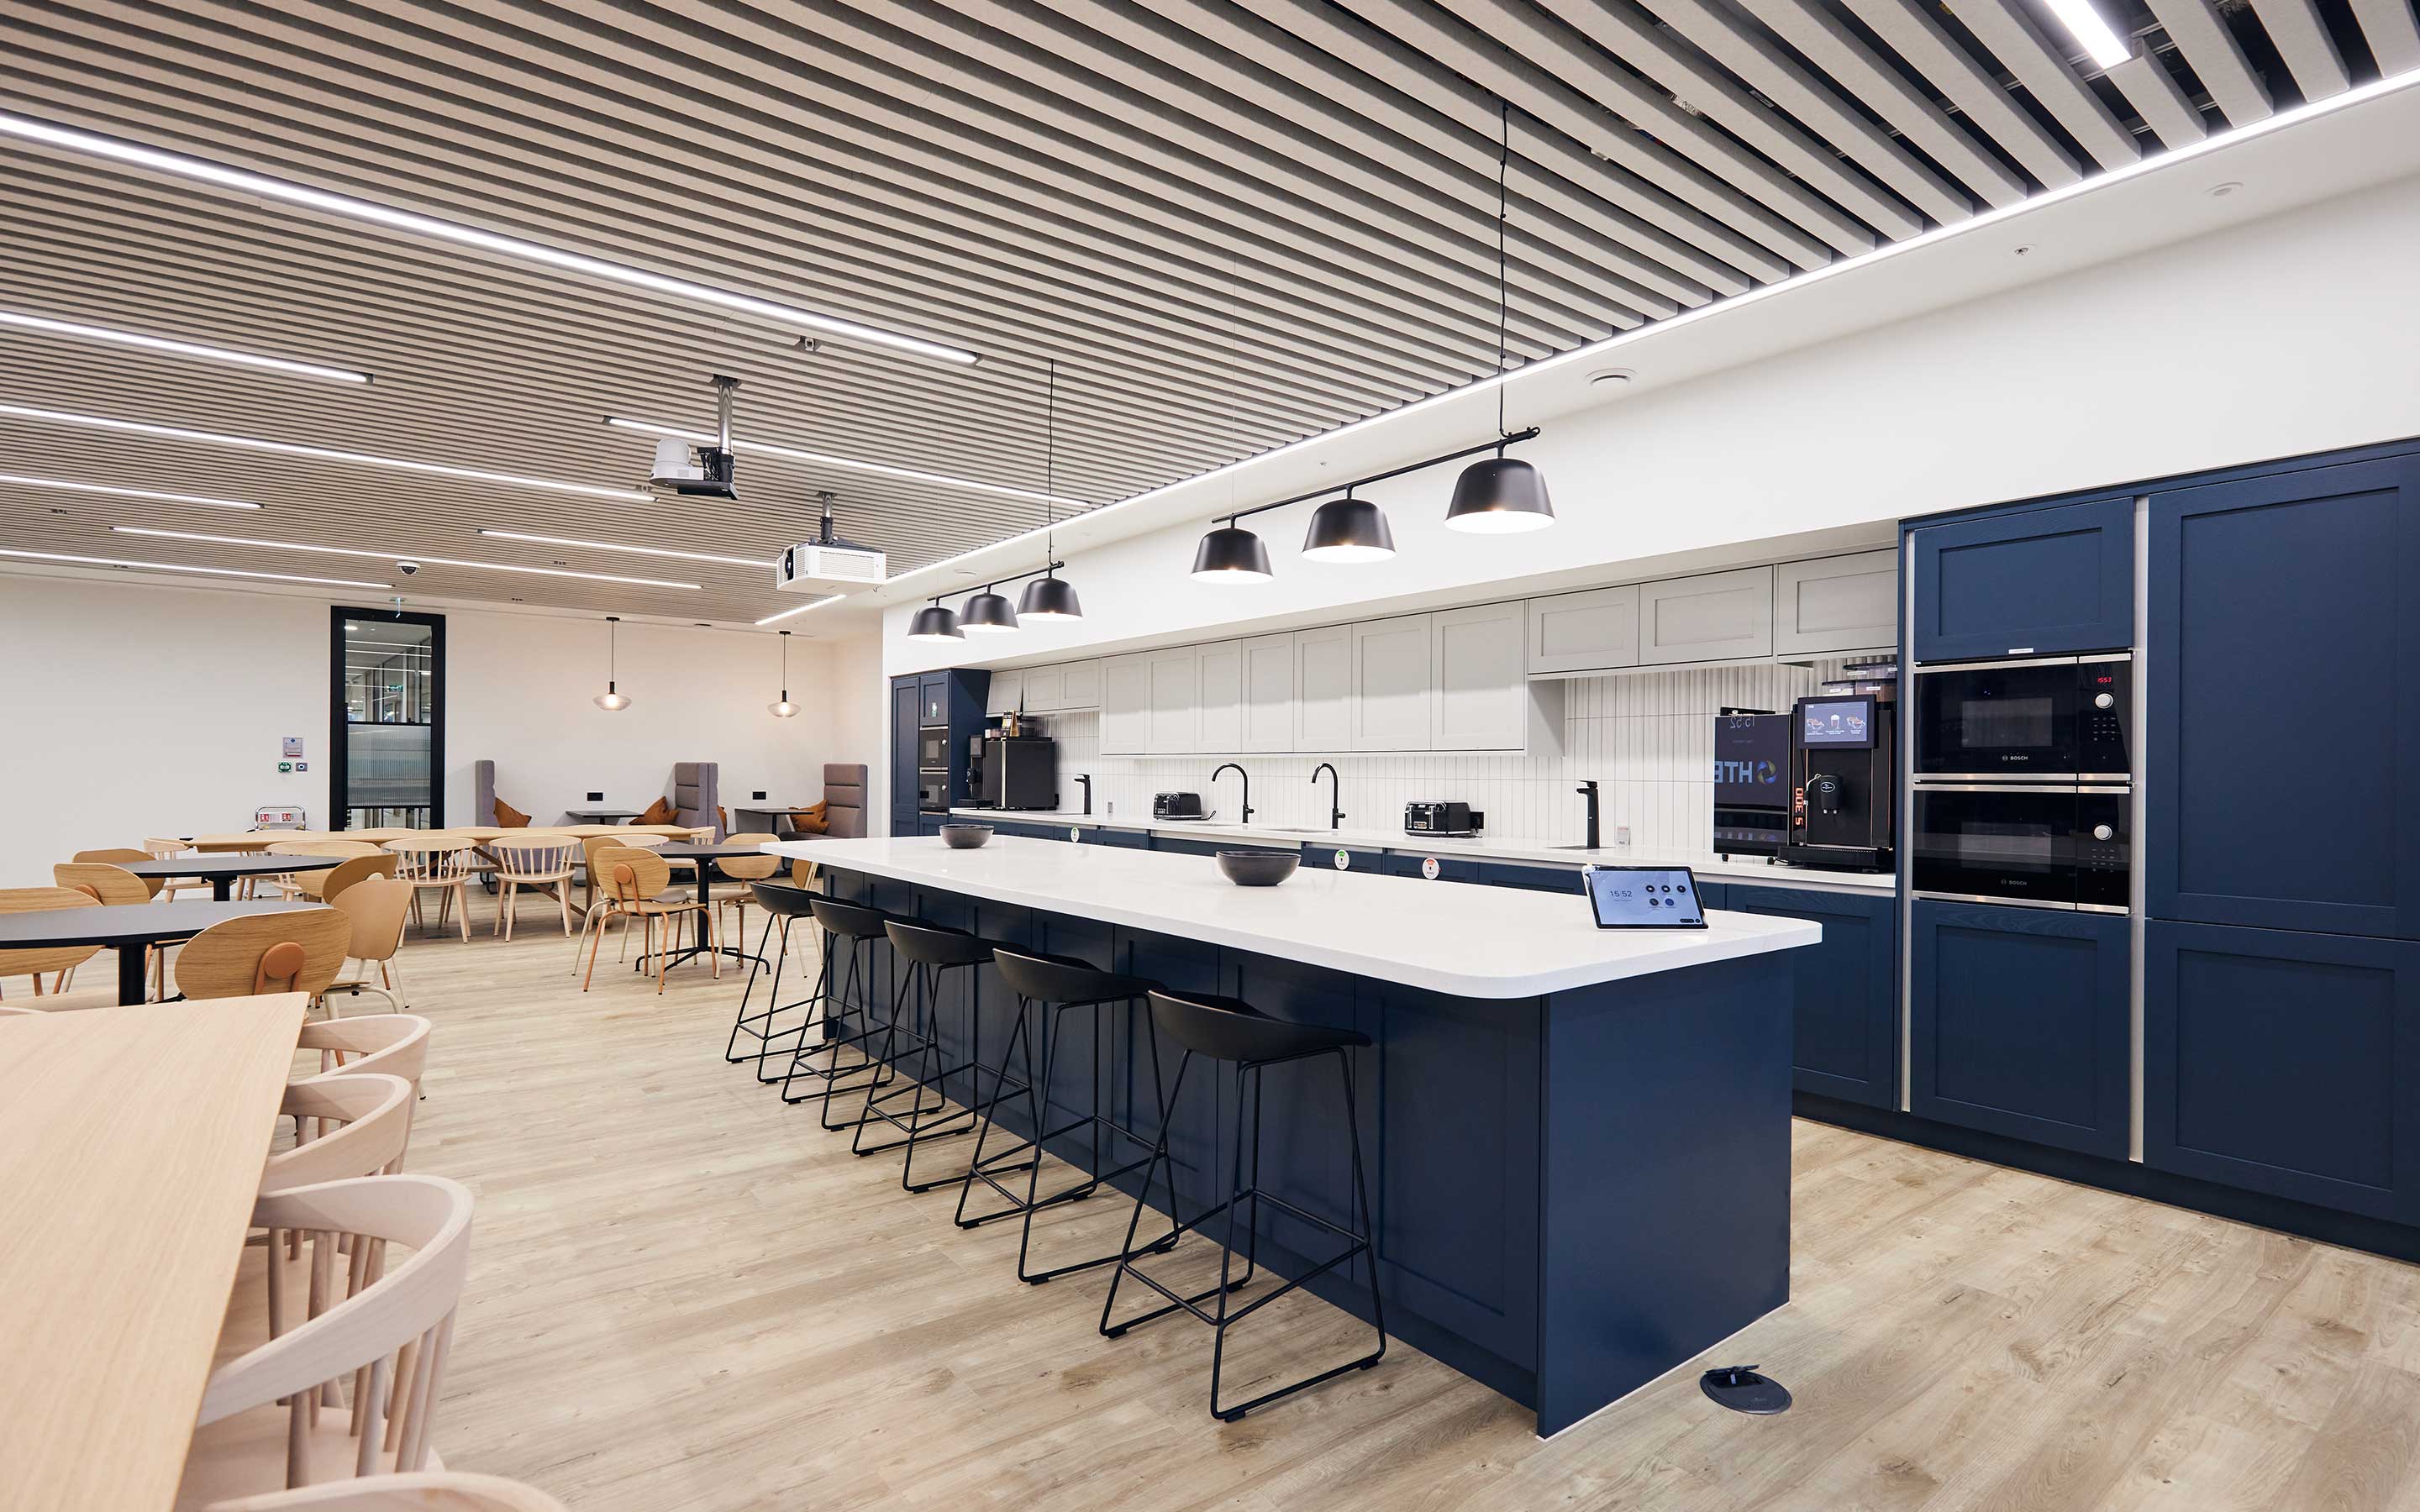 A spacious, bright office teapoint with navy cabinets, a breakfast bar and lots of seating for employees